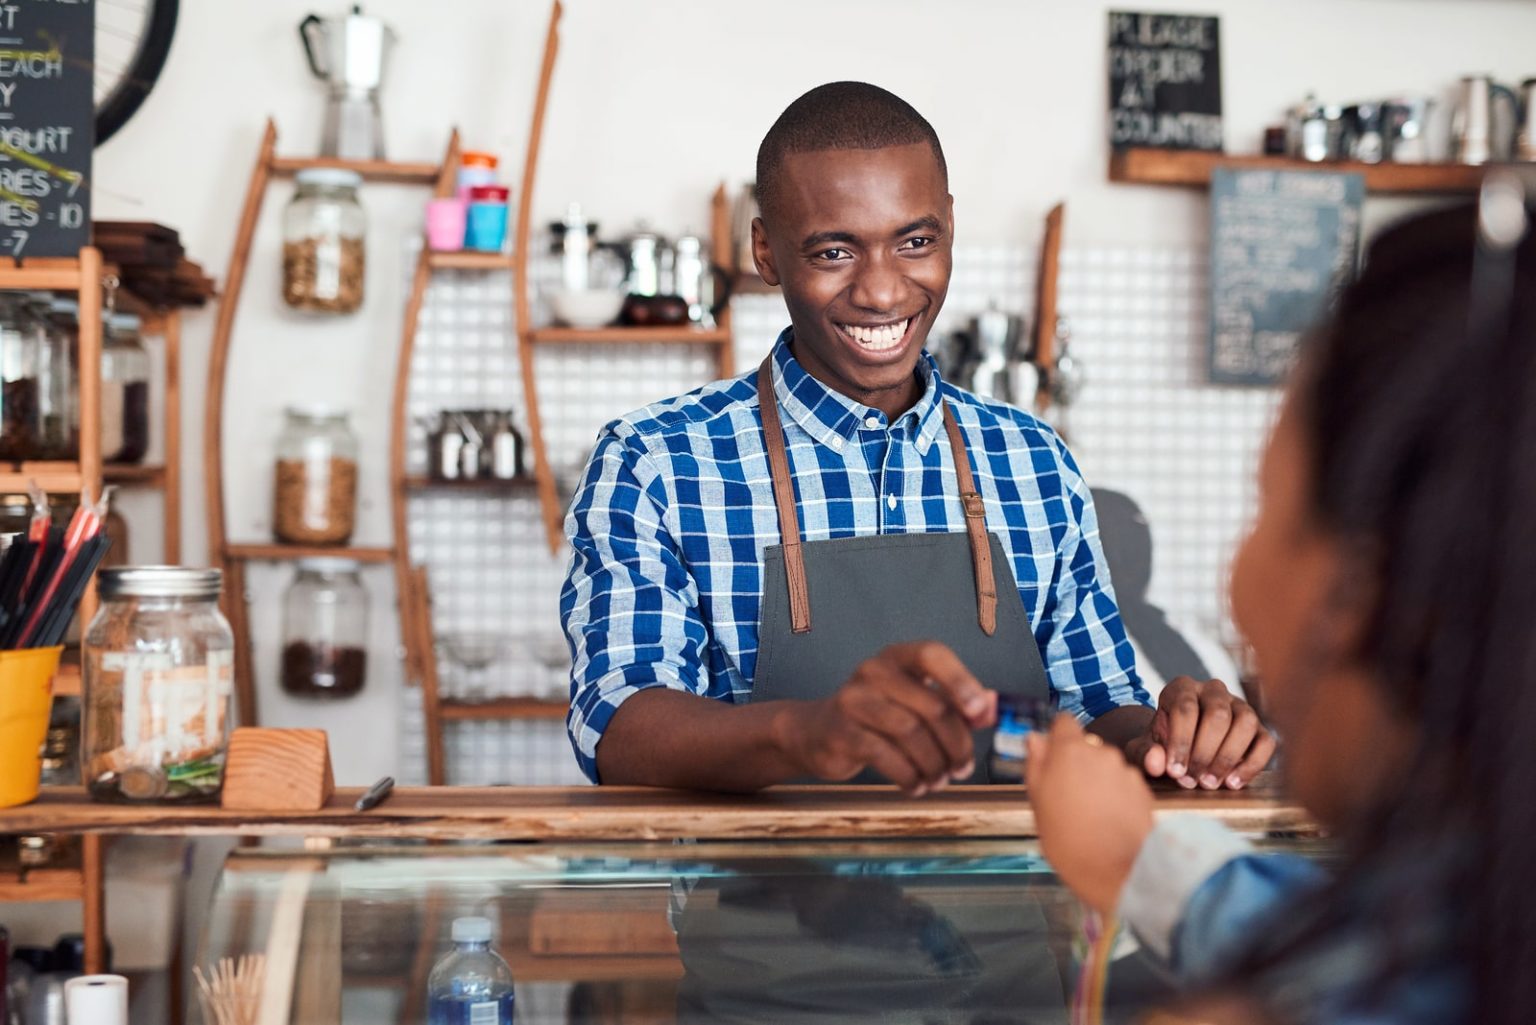 Top 10 problems for small businesses in Nigeria and solution